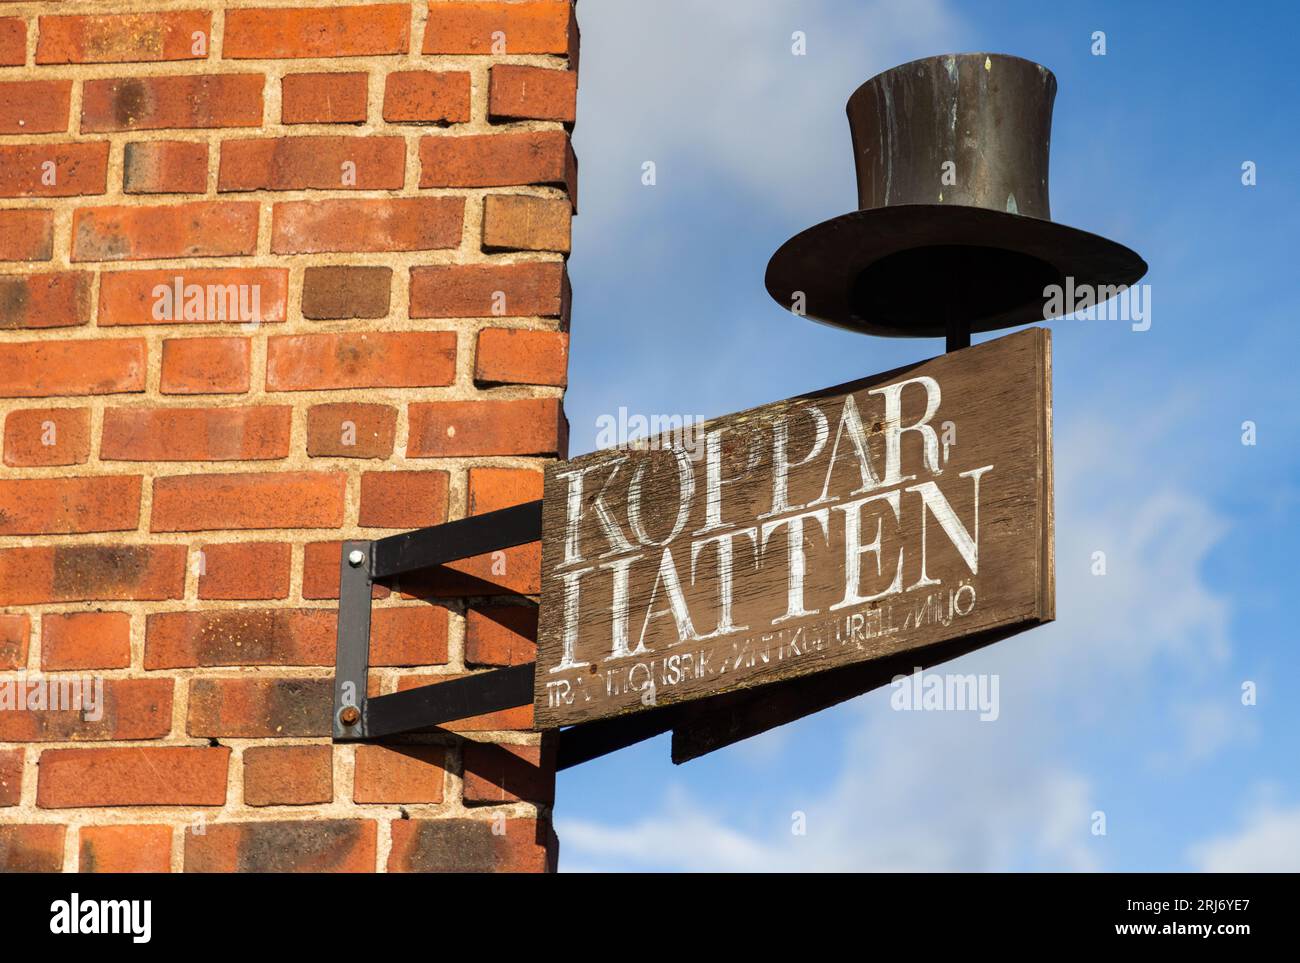 Signs and symbols, a tile building, Falun, Sweden. Stock Photo